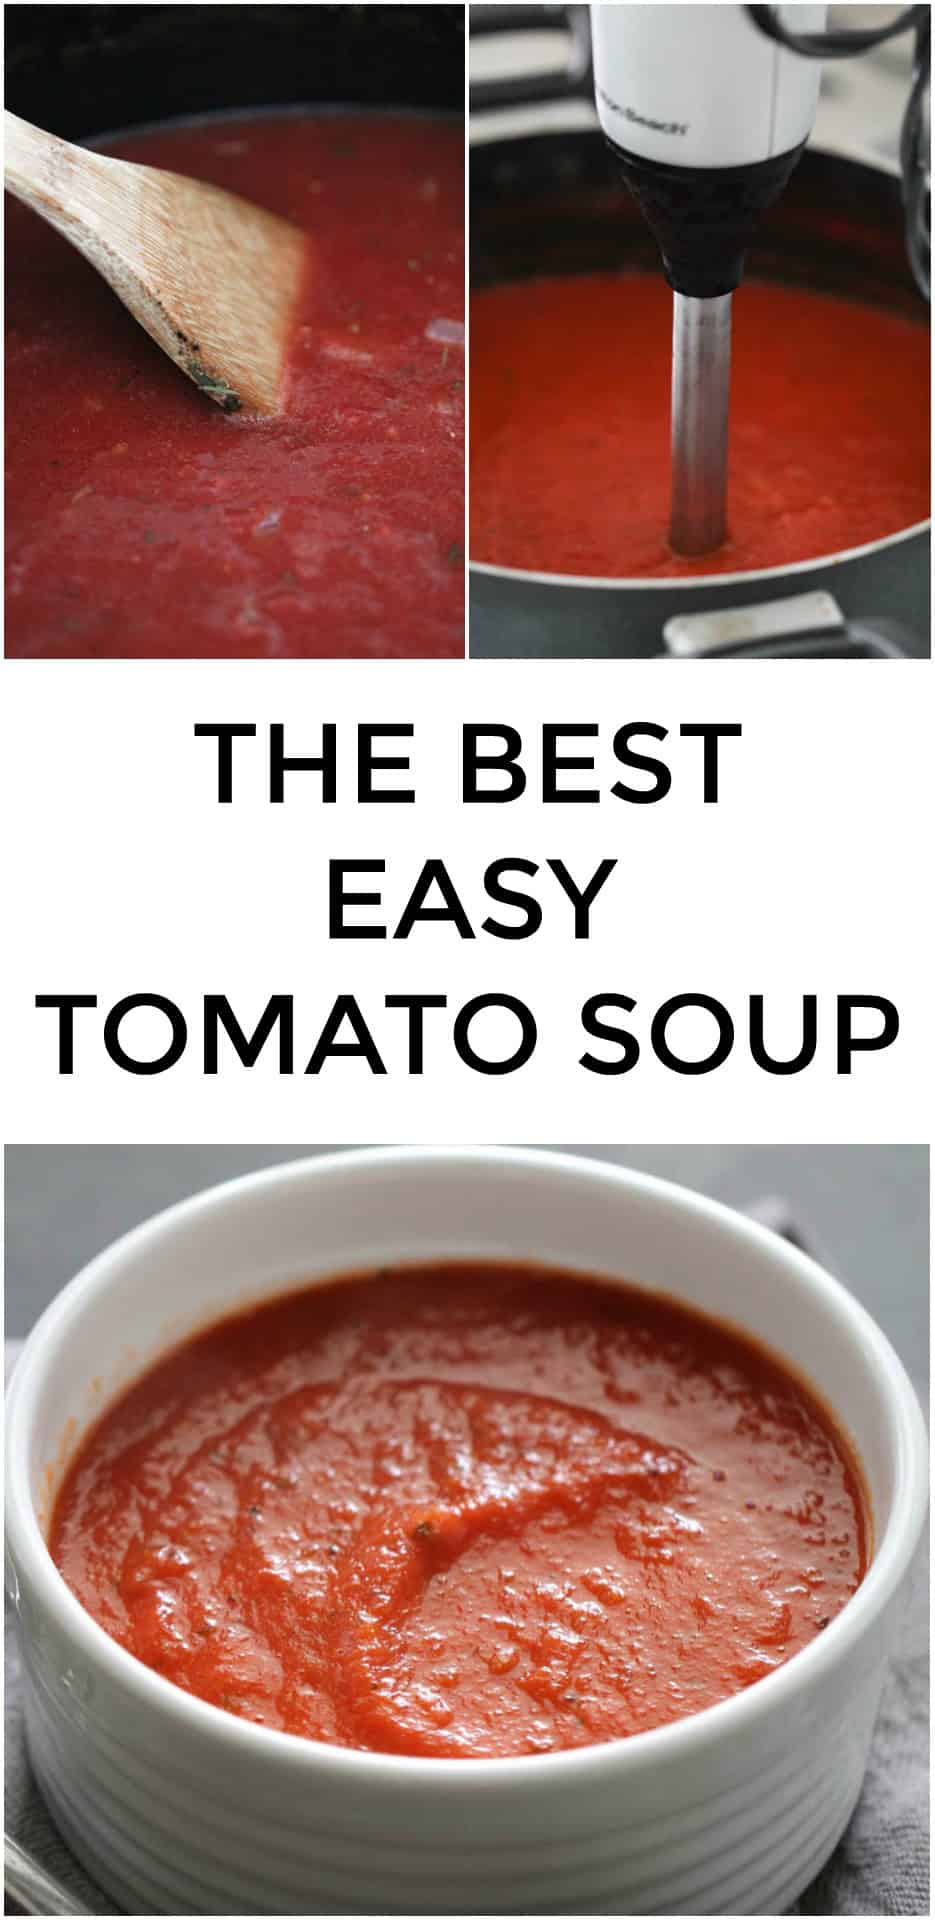 Homemade Tomato Soup - Made in 30 Minutes! - Life Made Simple